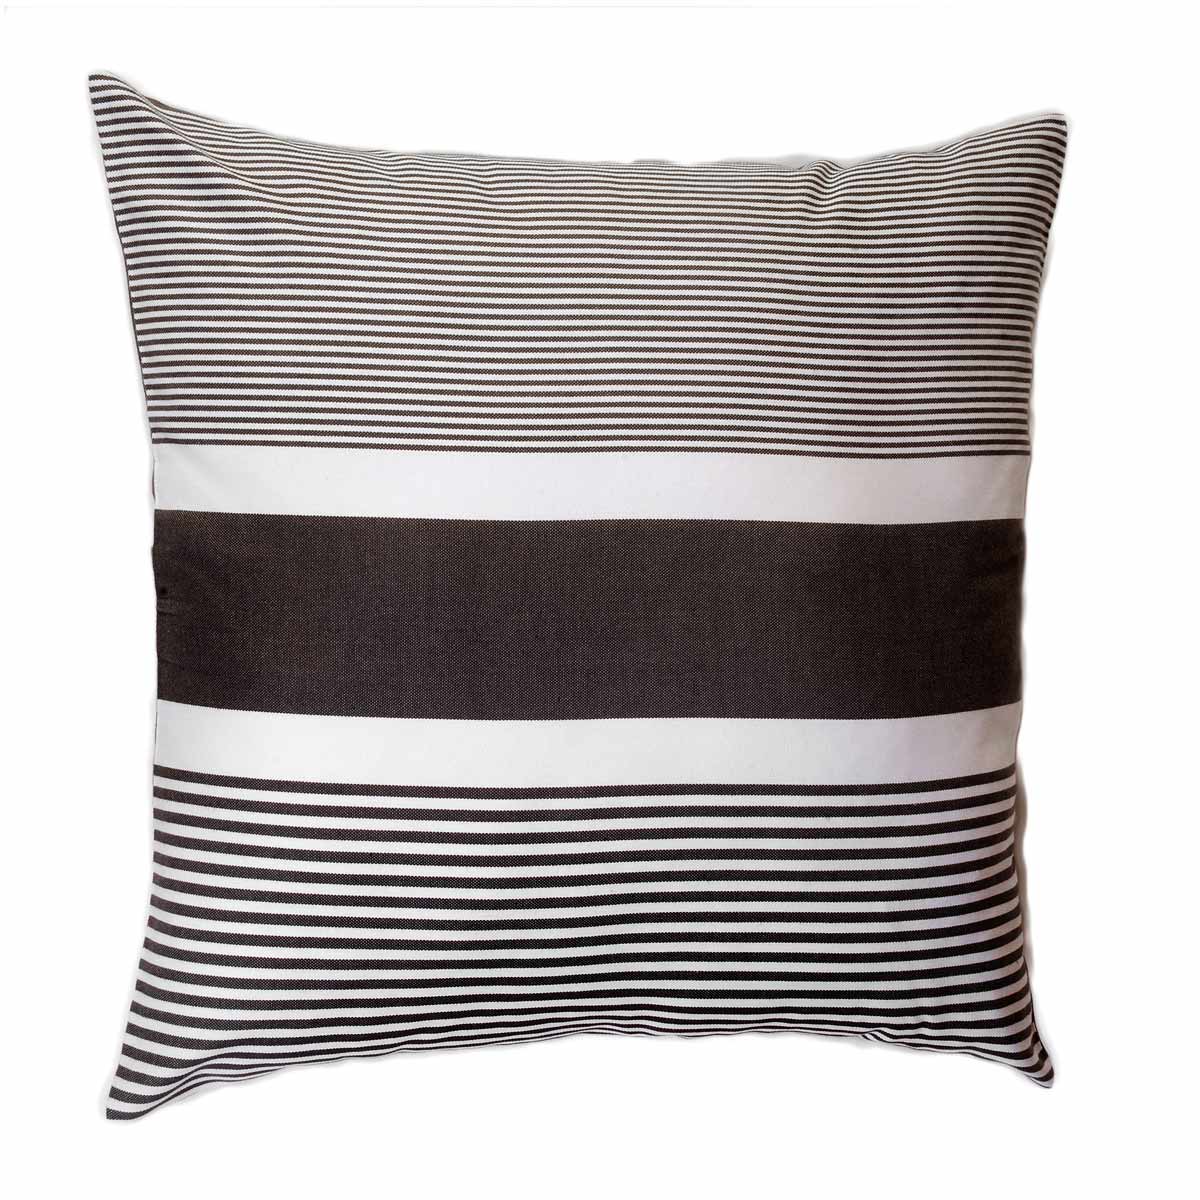 Housse de coussin coton anthracite rayures blanches 60 x 60